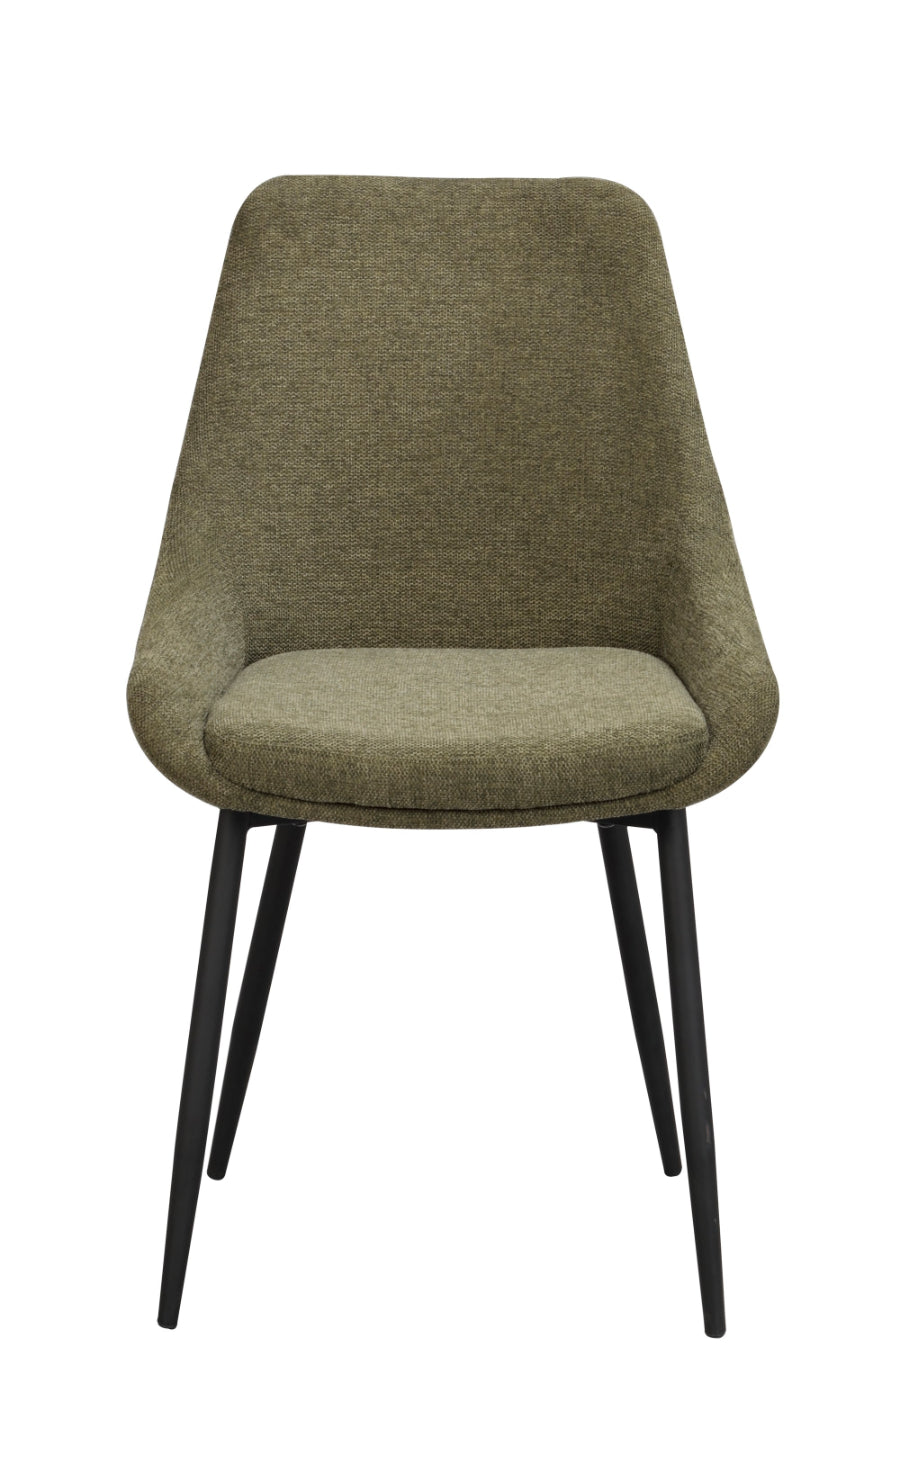 SIERRA Fabric Set of 2 Chairs